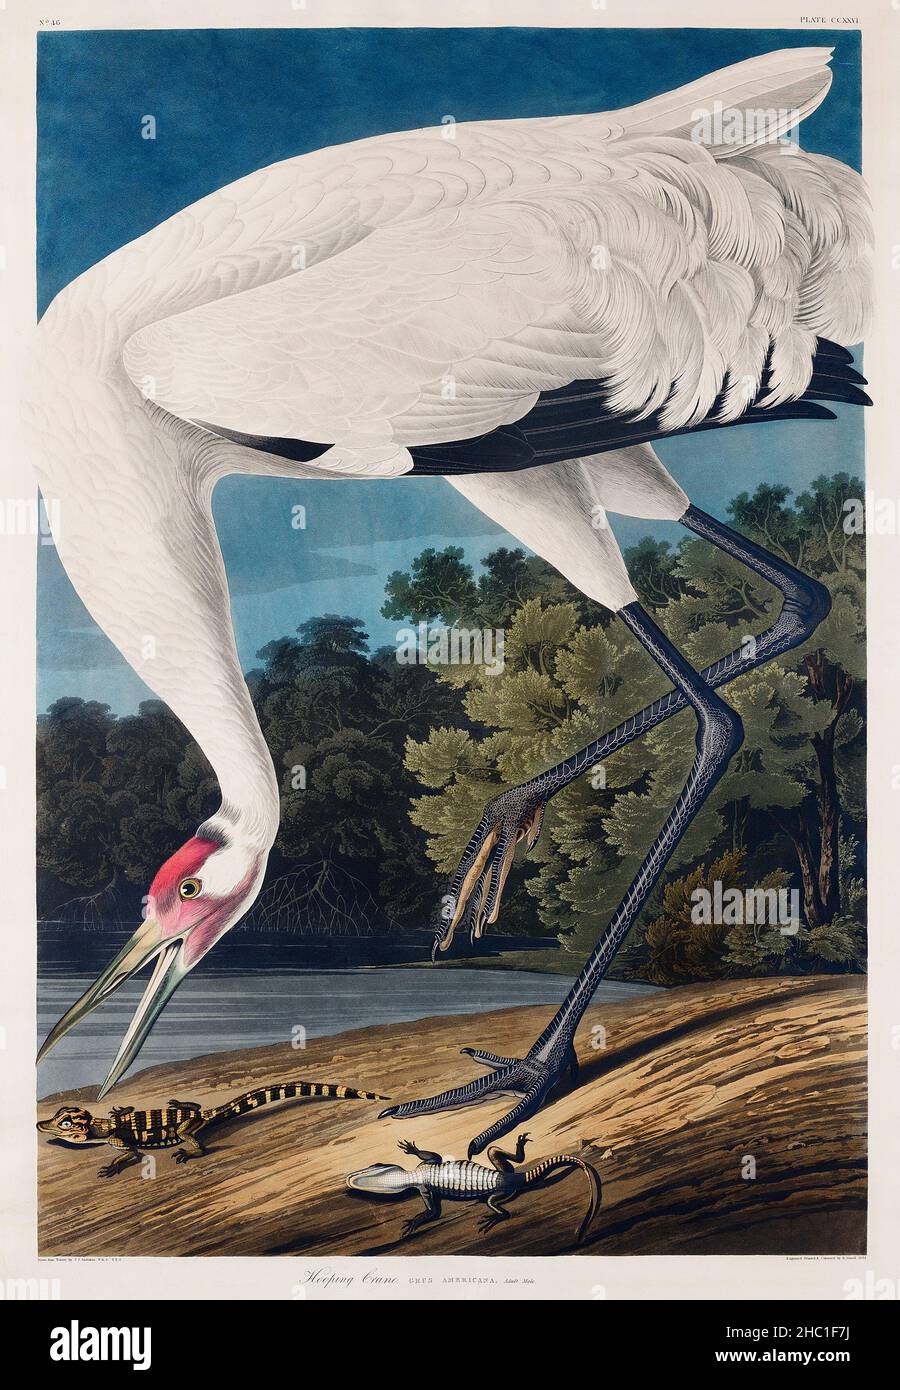 Hooping Crane from Birds of America (1827) by John James Audubon (1785 - 1851), etched by Robert Havell (1793 - 1878). Stock Photo